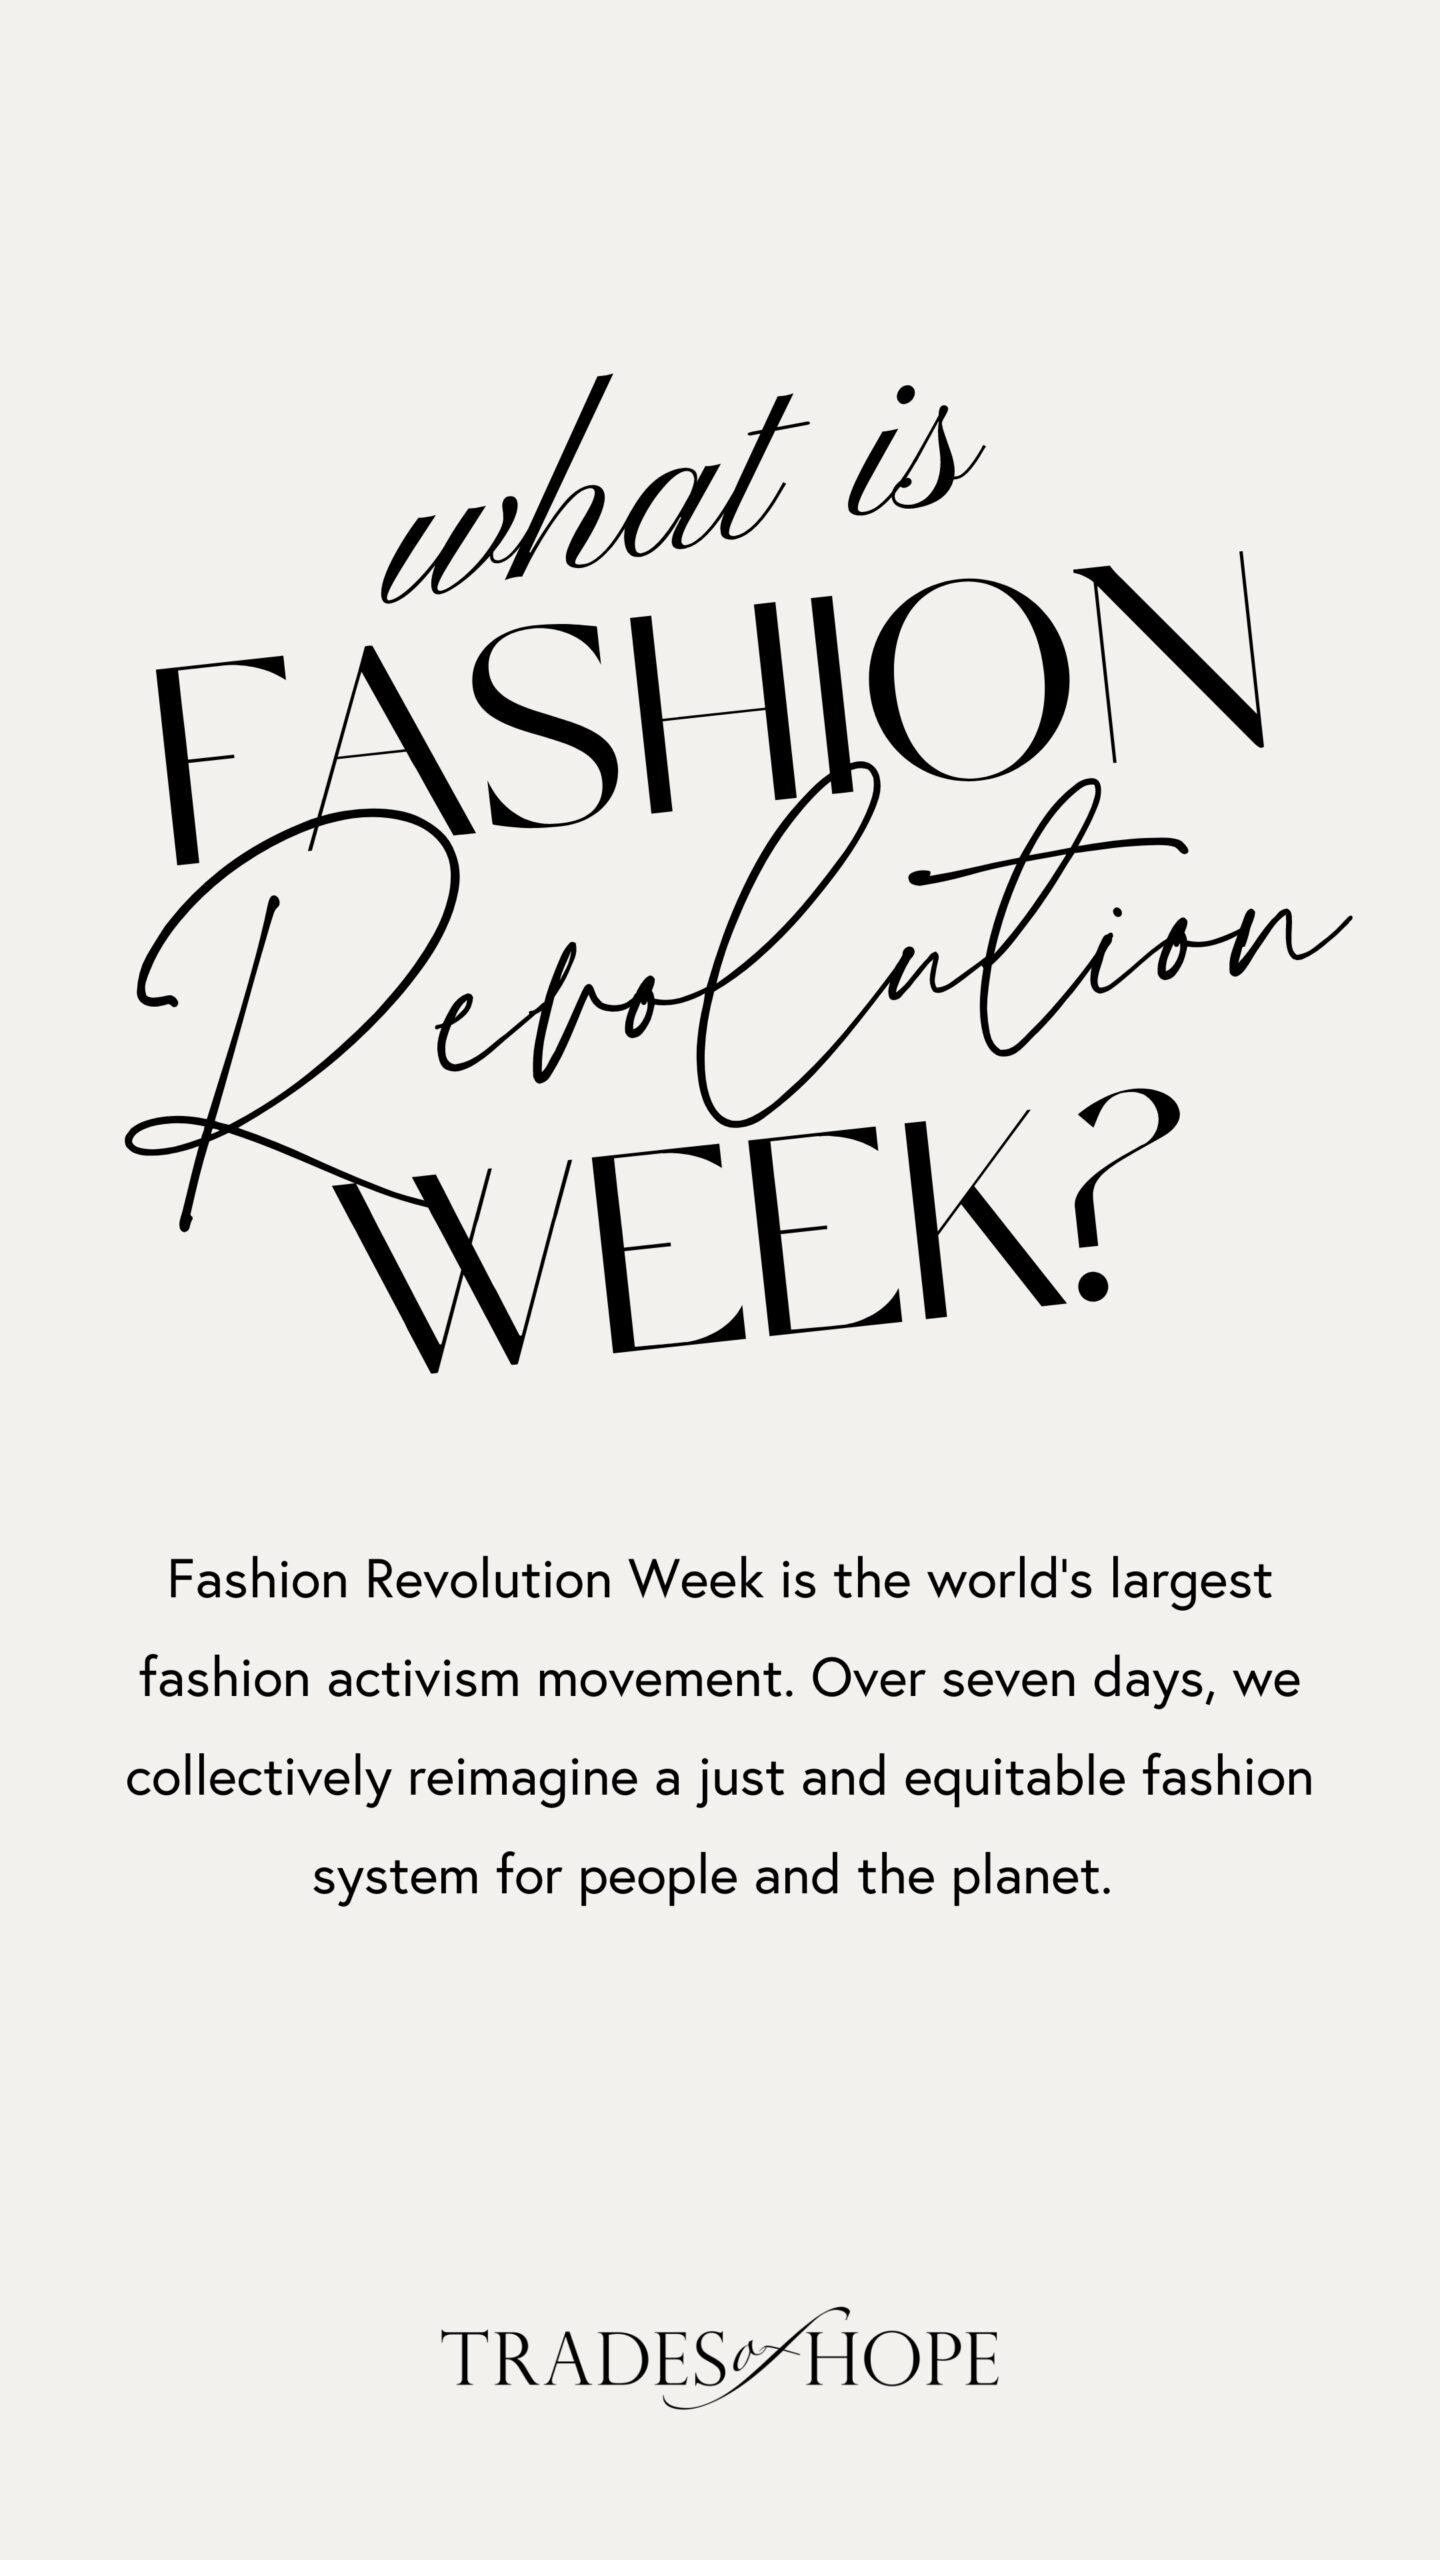 Fashion as a Force For Good